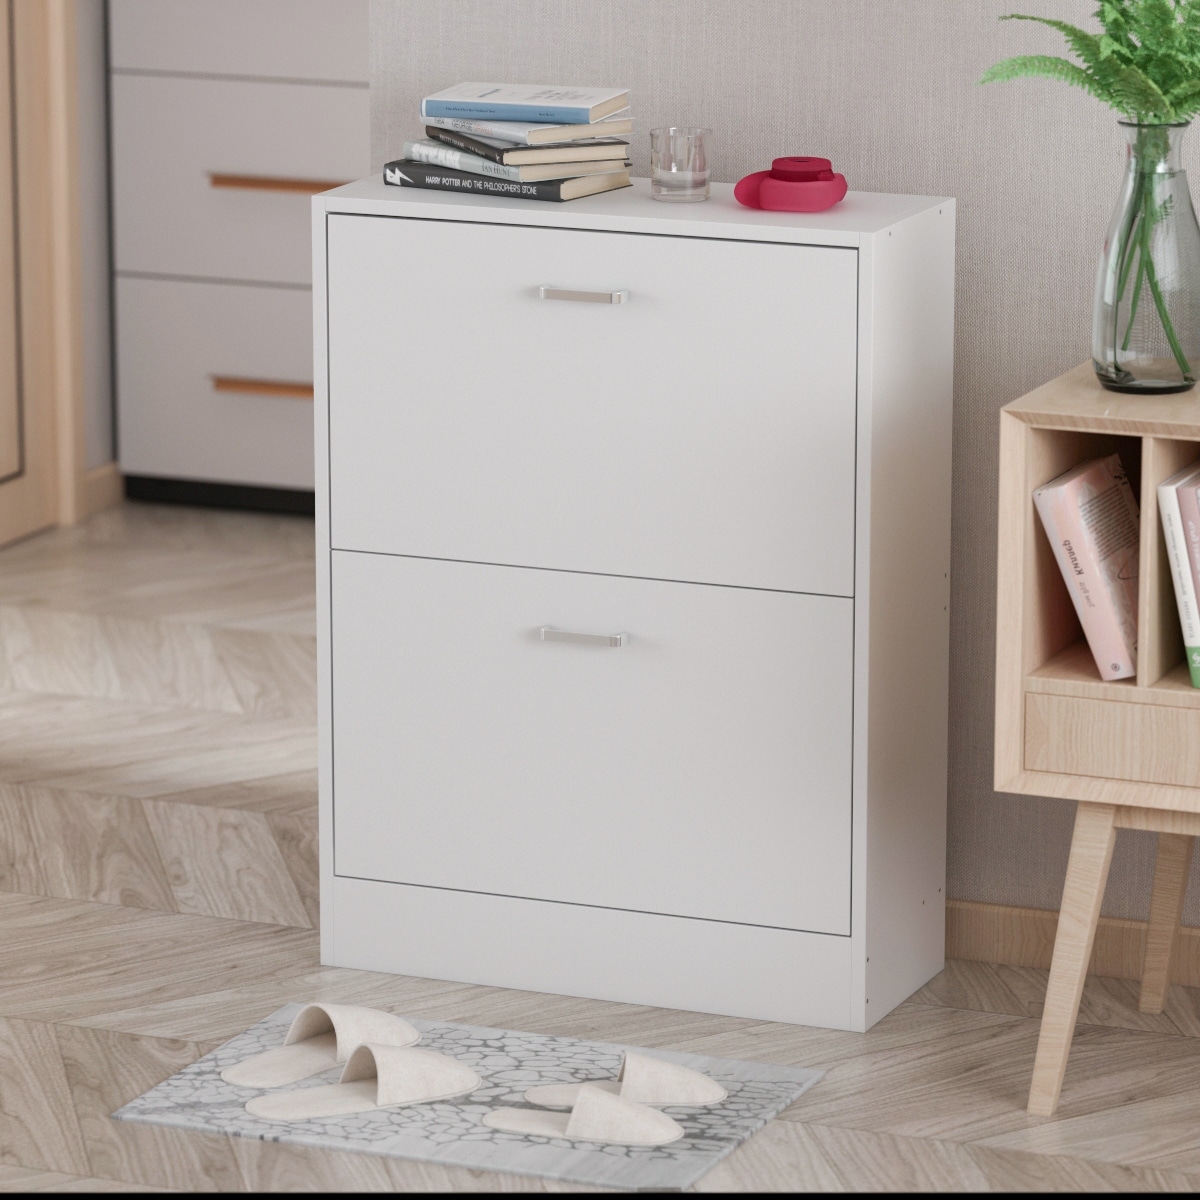 https://ak1.ostkcdn.com/images/products/is/images/direct/929156f073a545e9e08100a17adc90745d8fcf40/Kerrogee-2-Drawes-Shoe-Cabinet---4-Tiers-Shoe-Rack---Up-to-12-Pairs.jpg